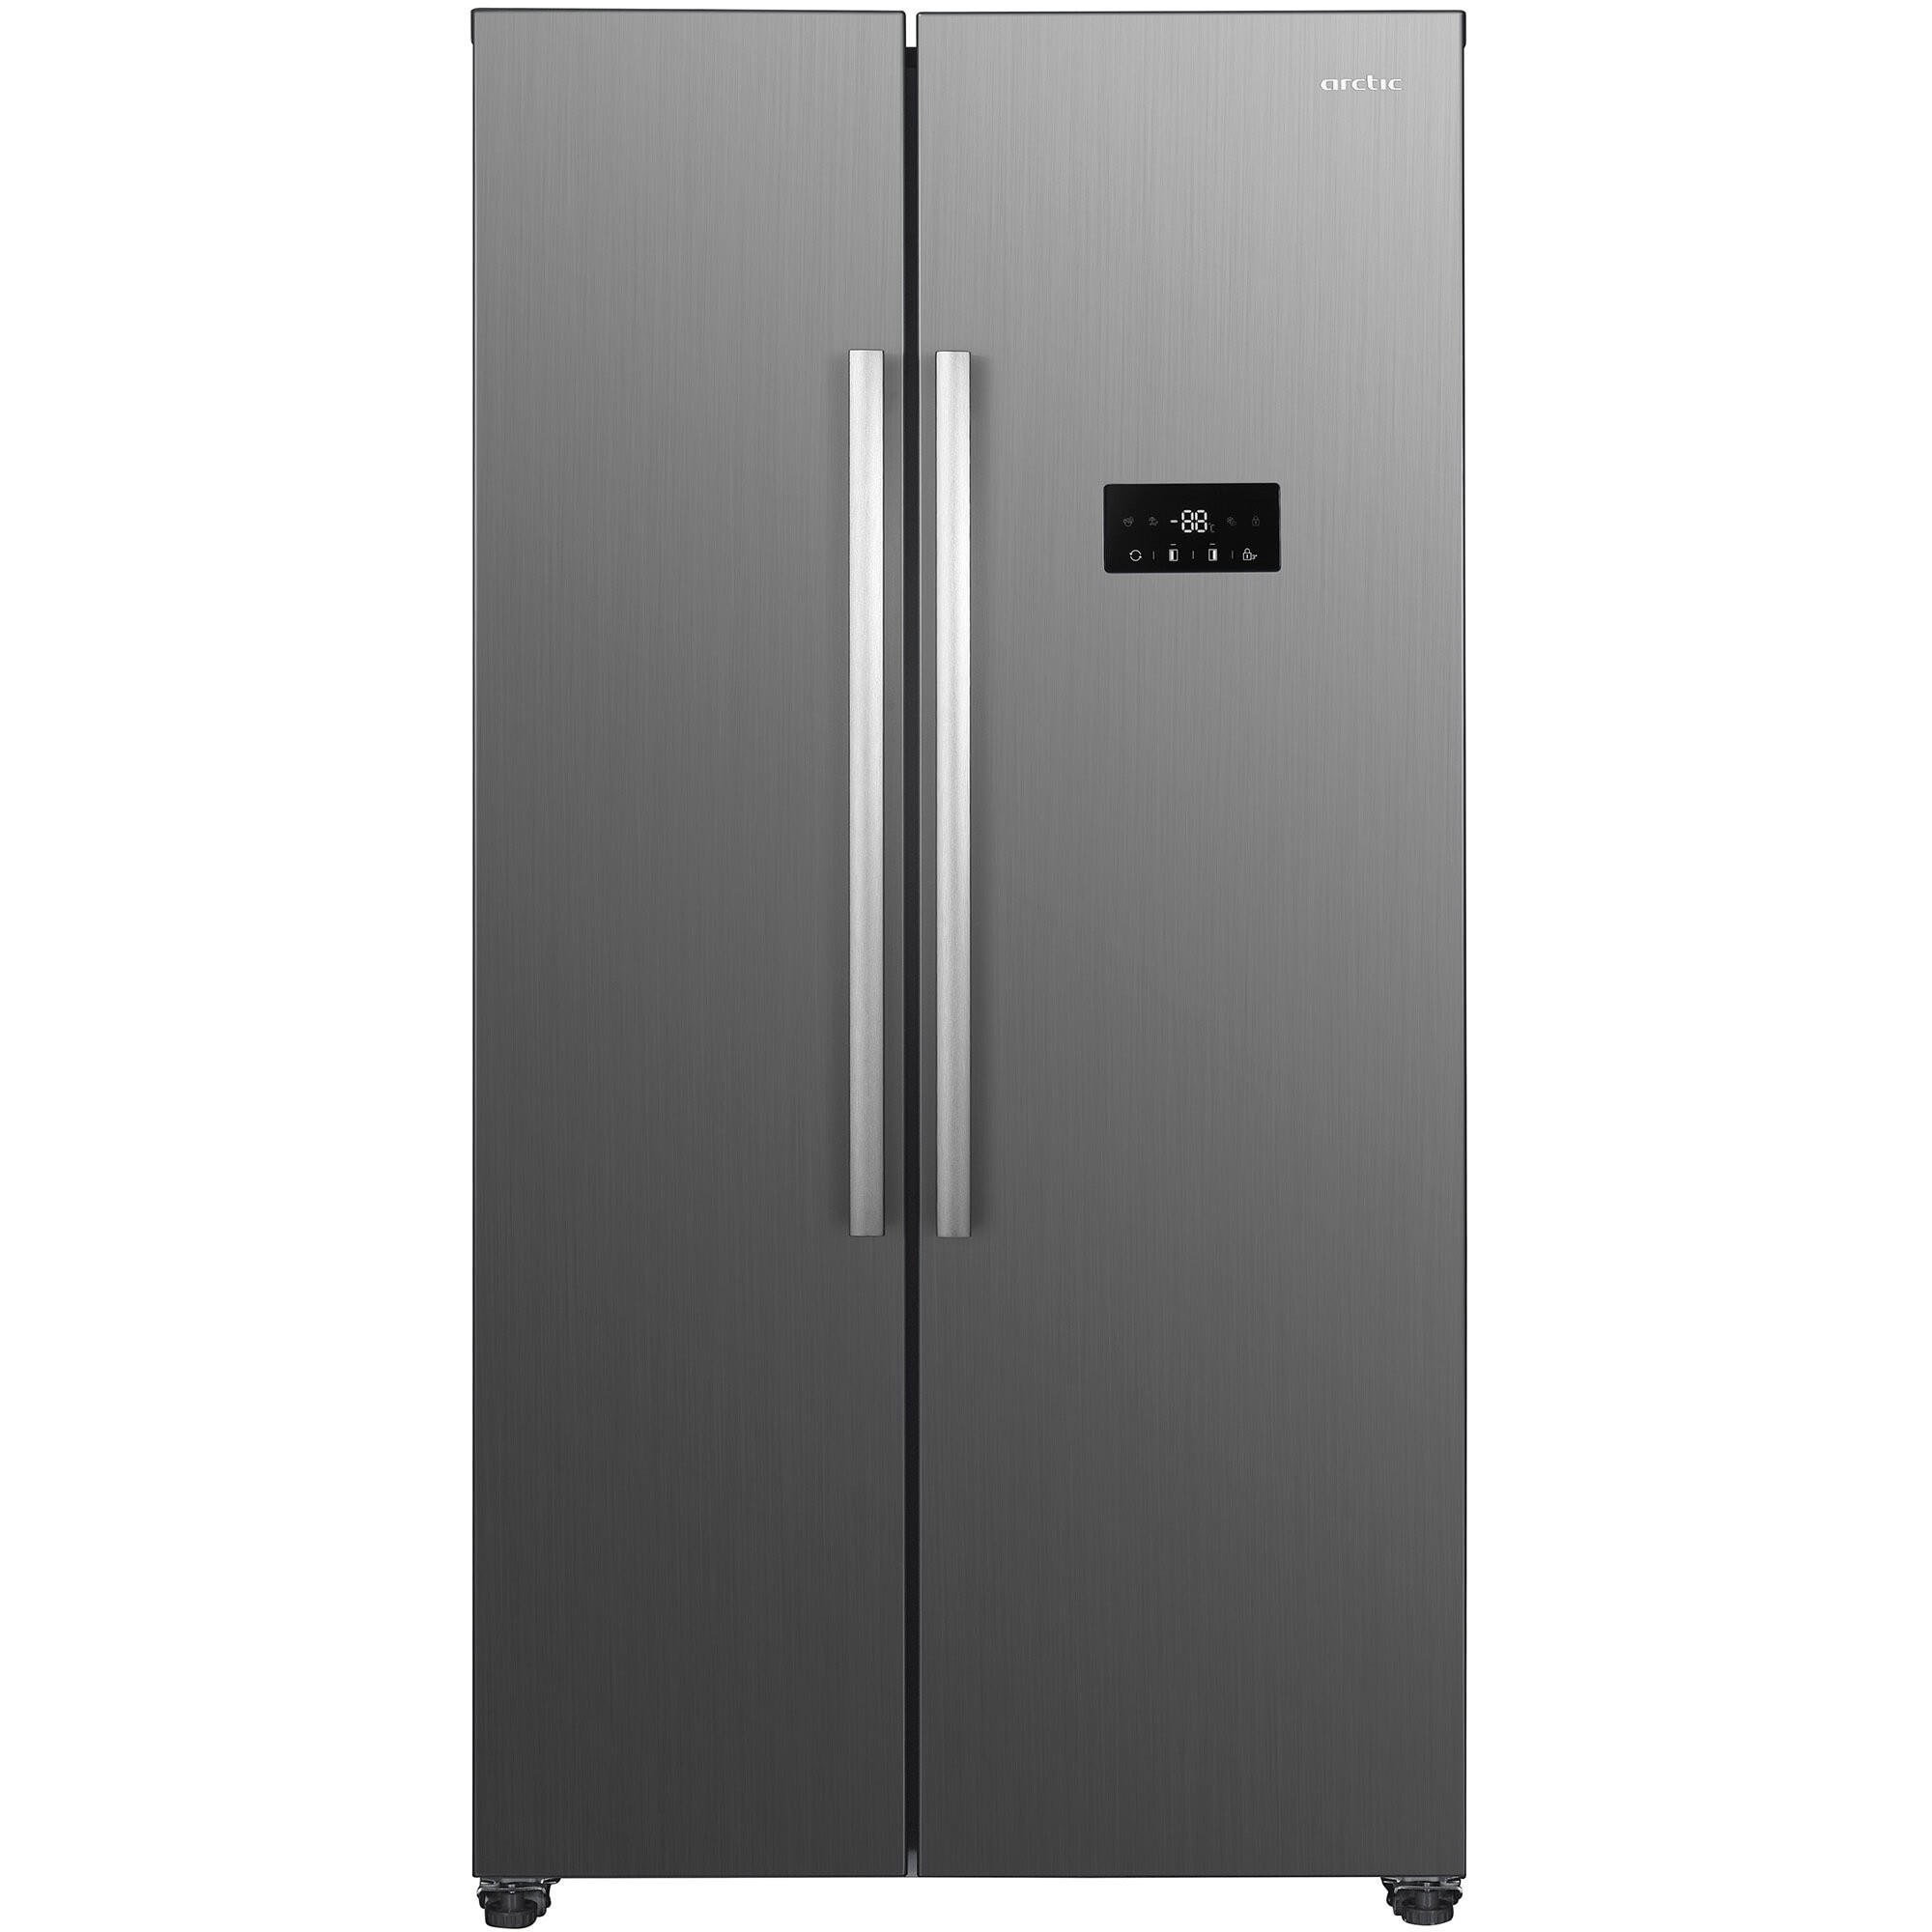  Side By Side Arctic, AS427E4NMT, 442 l, H 177 cm, Inox